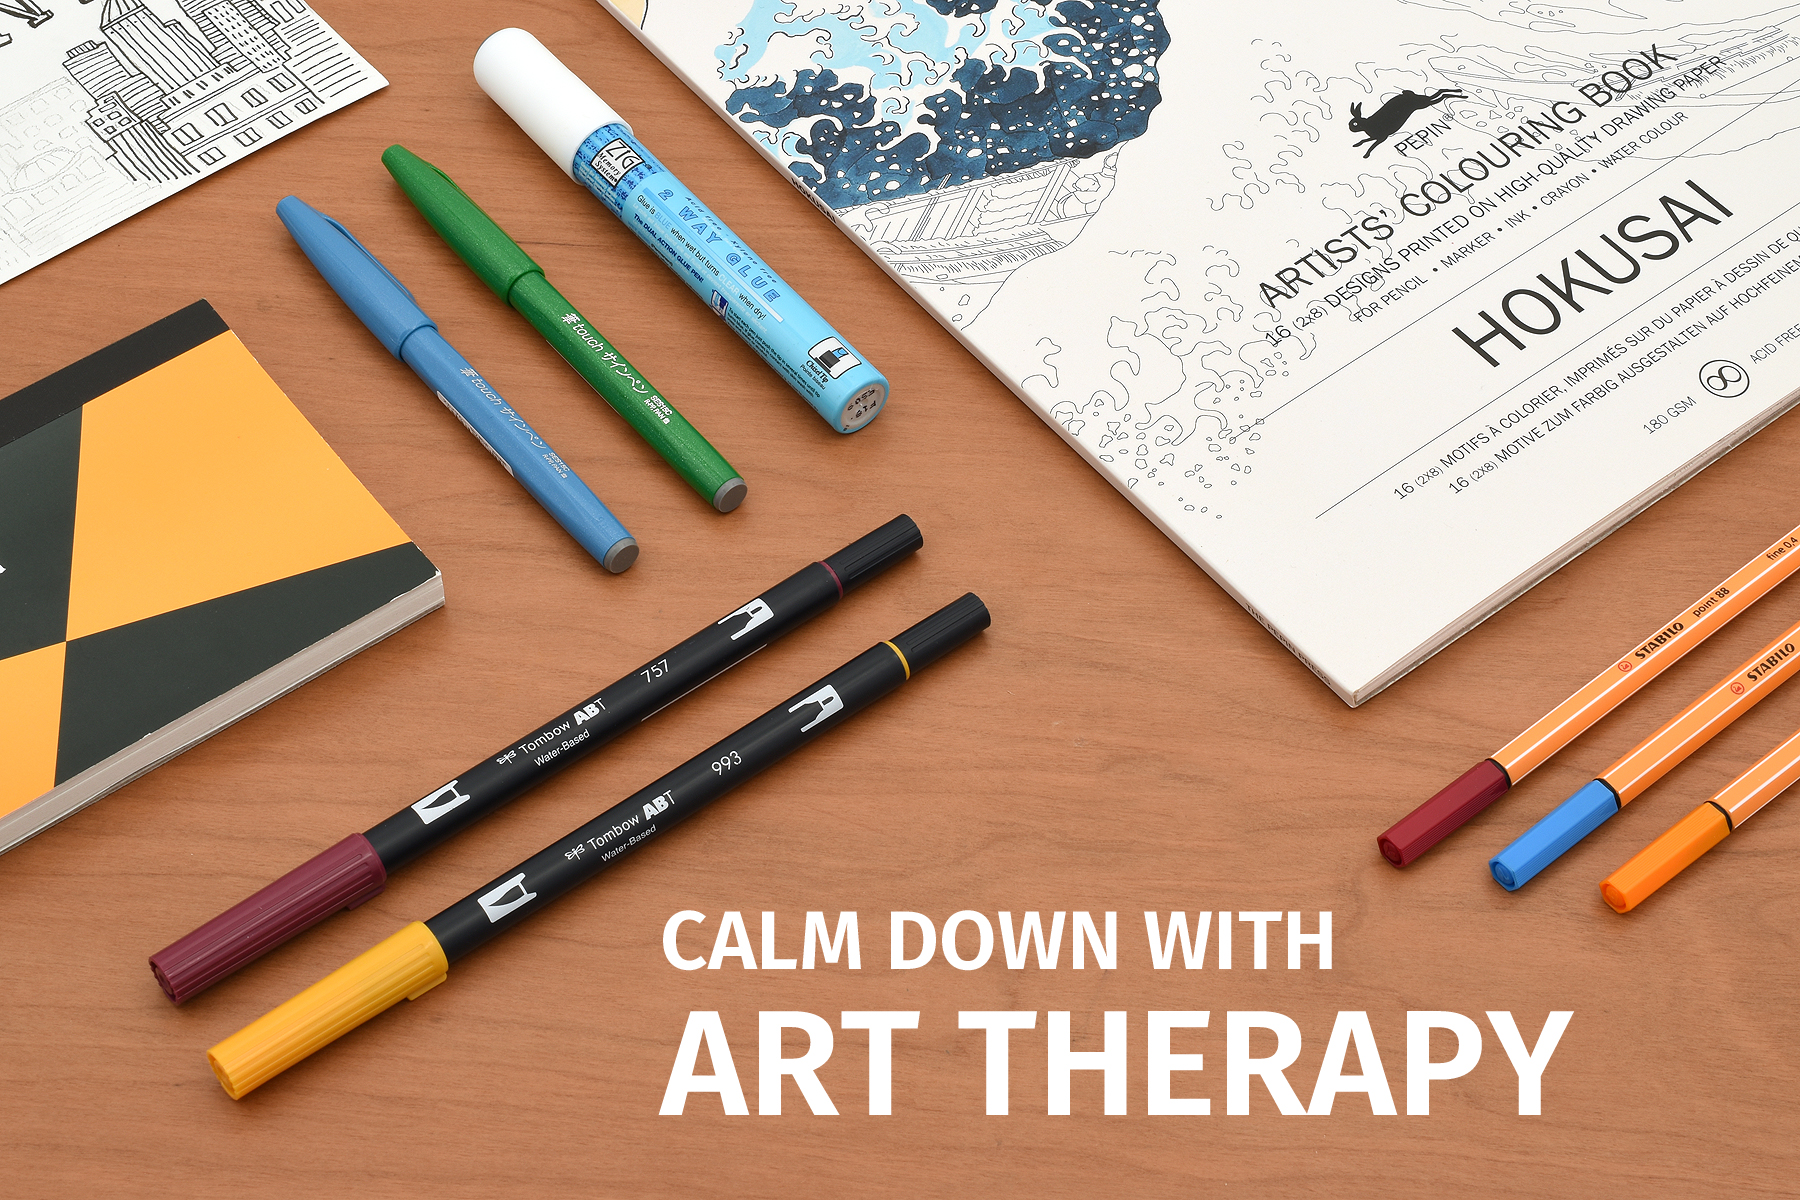 How To Calm Down With Art Therapy | Jetpens